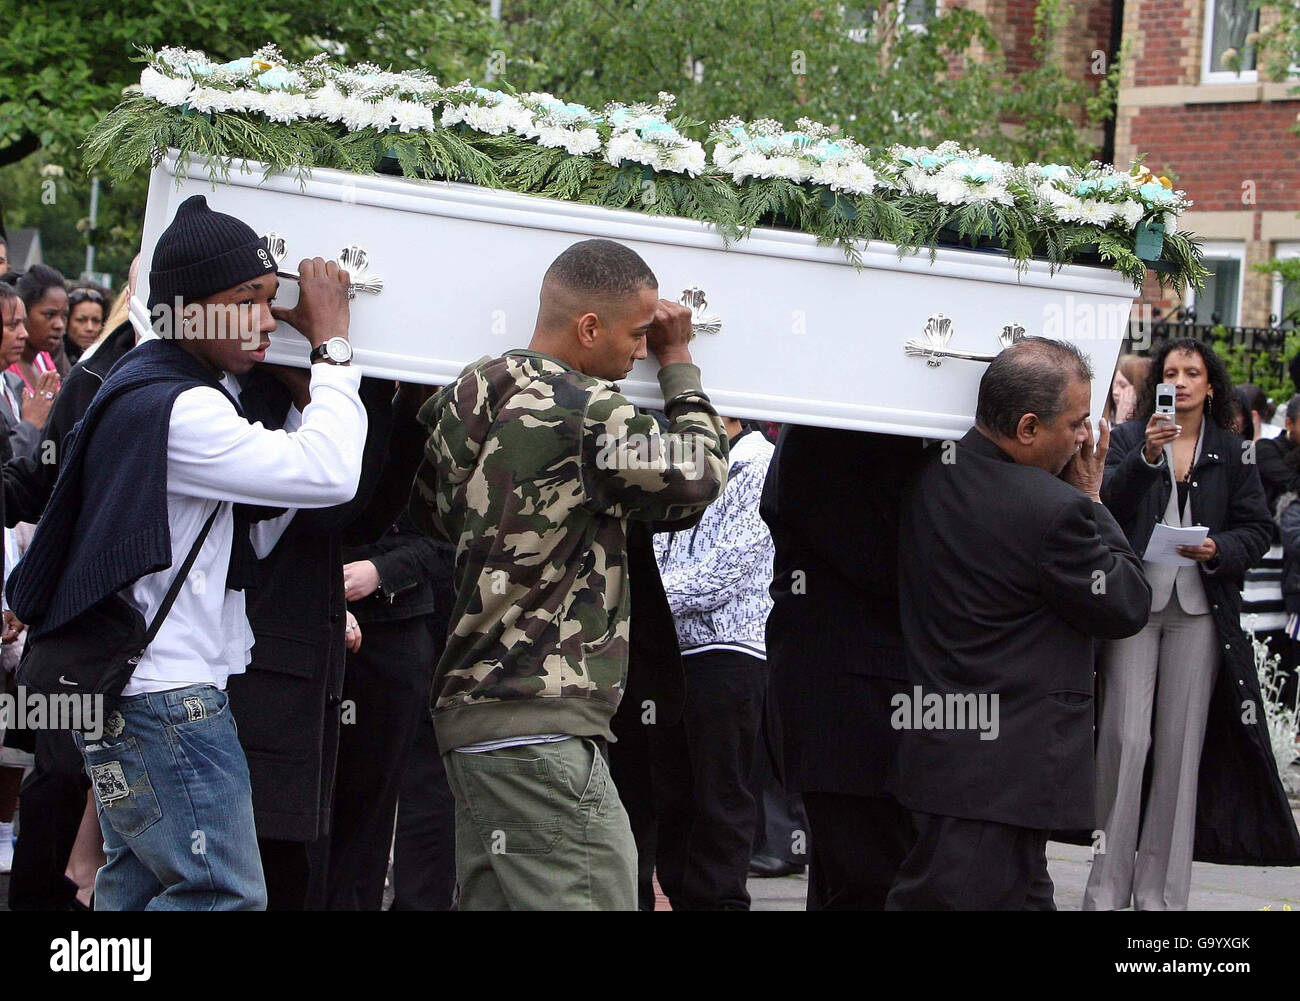 The coffin of 12-year-old Kamilah Peniston is carried into St Kentigans Church, Fallowfield. Kamilah Peniston was fatally shot on Monday 30 April 2007 in Gorton. Stock Photo